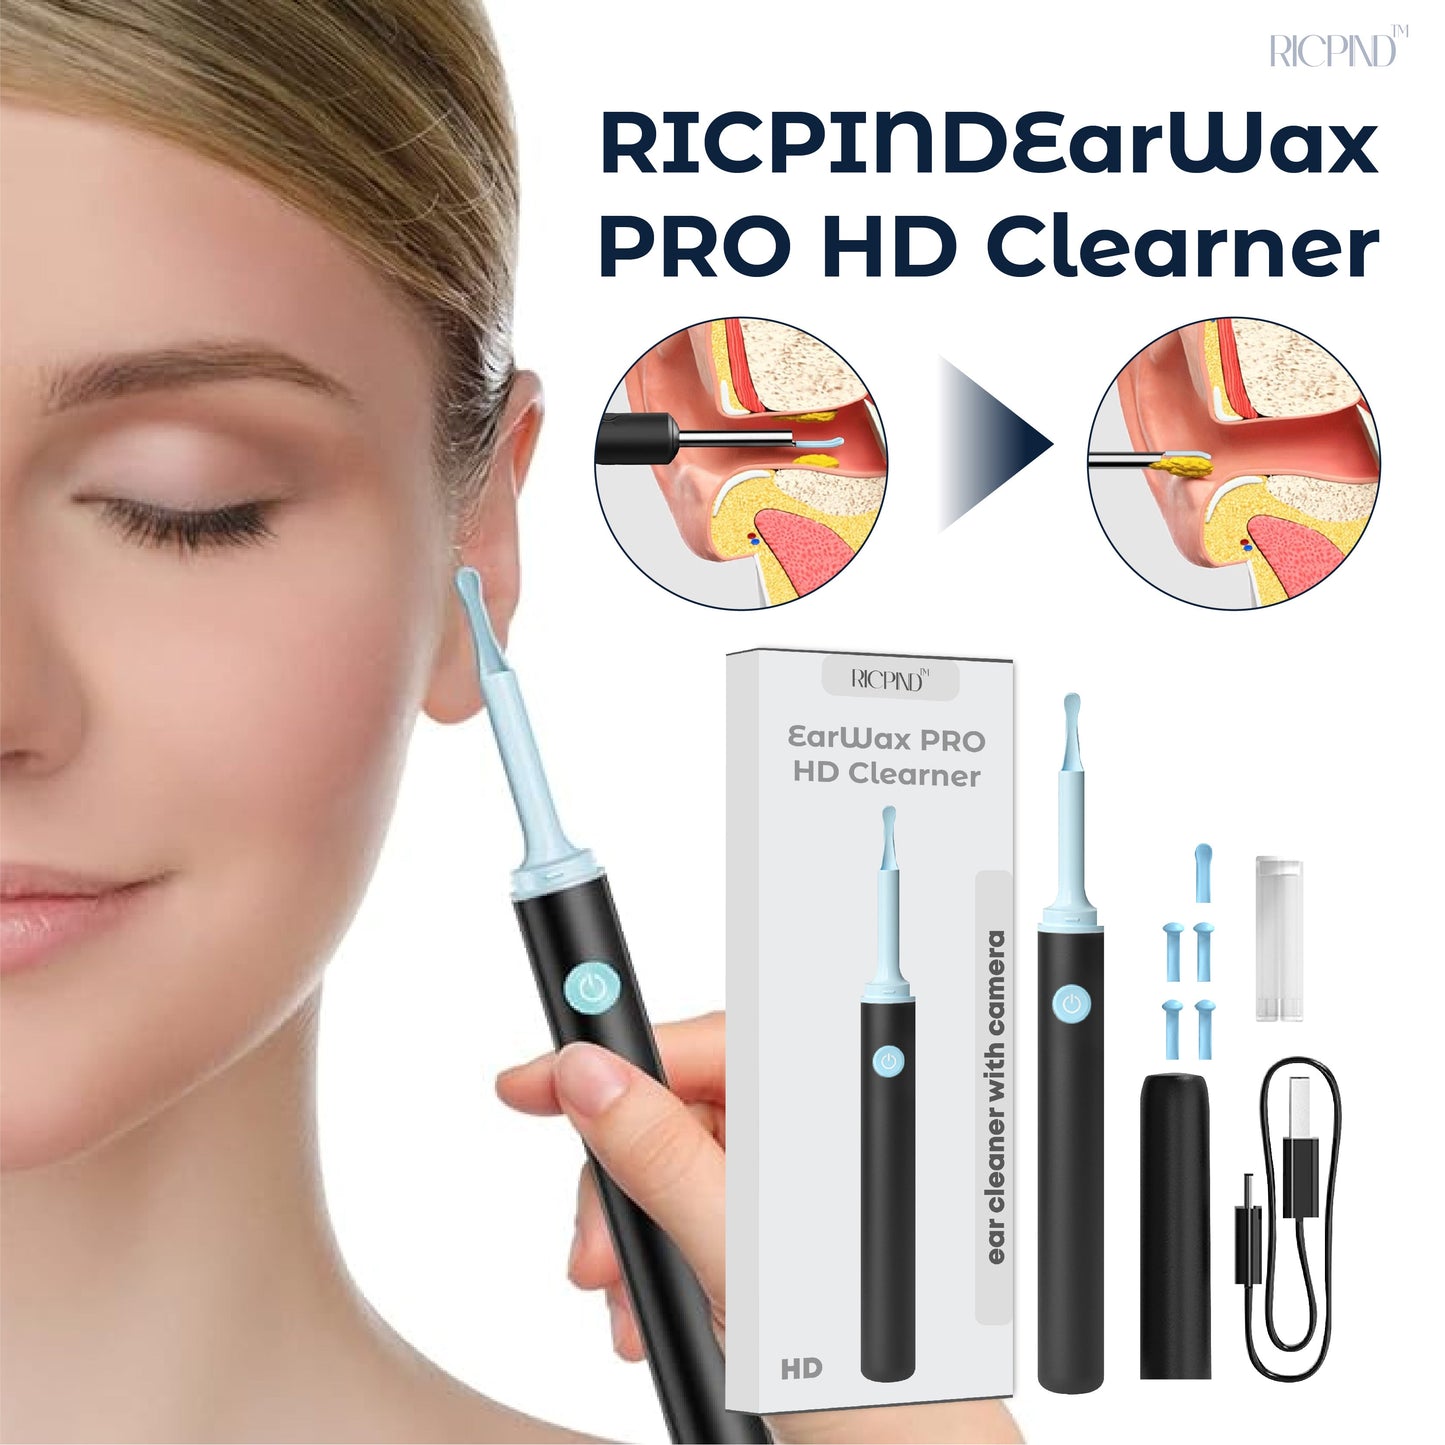 RICPIND EarWax PRO HD Clearner